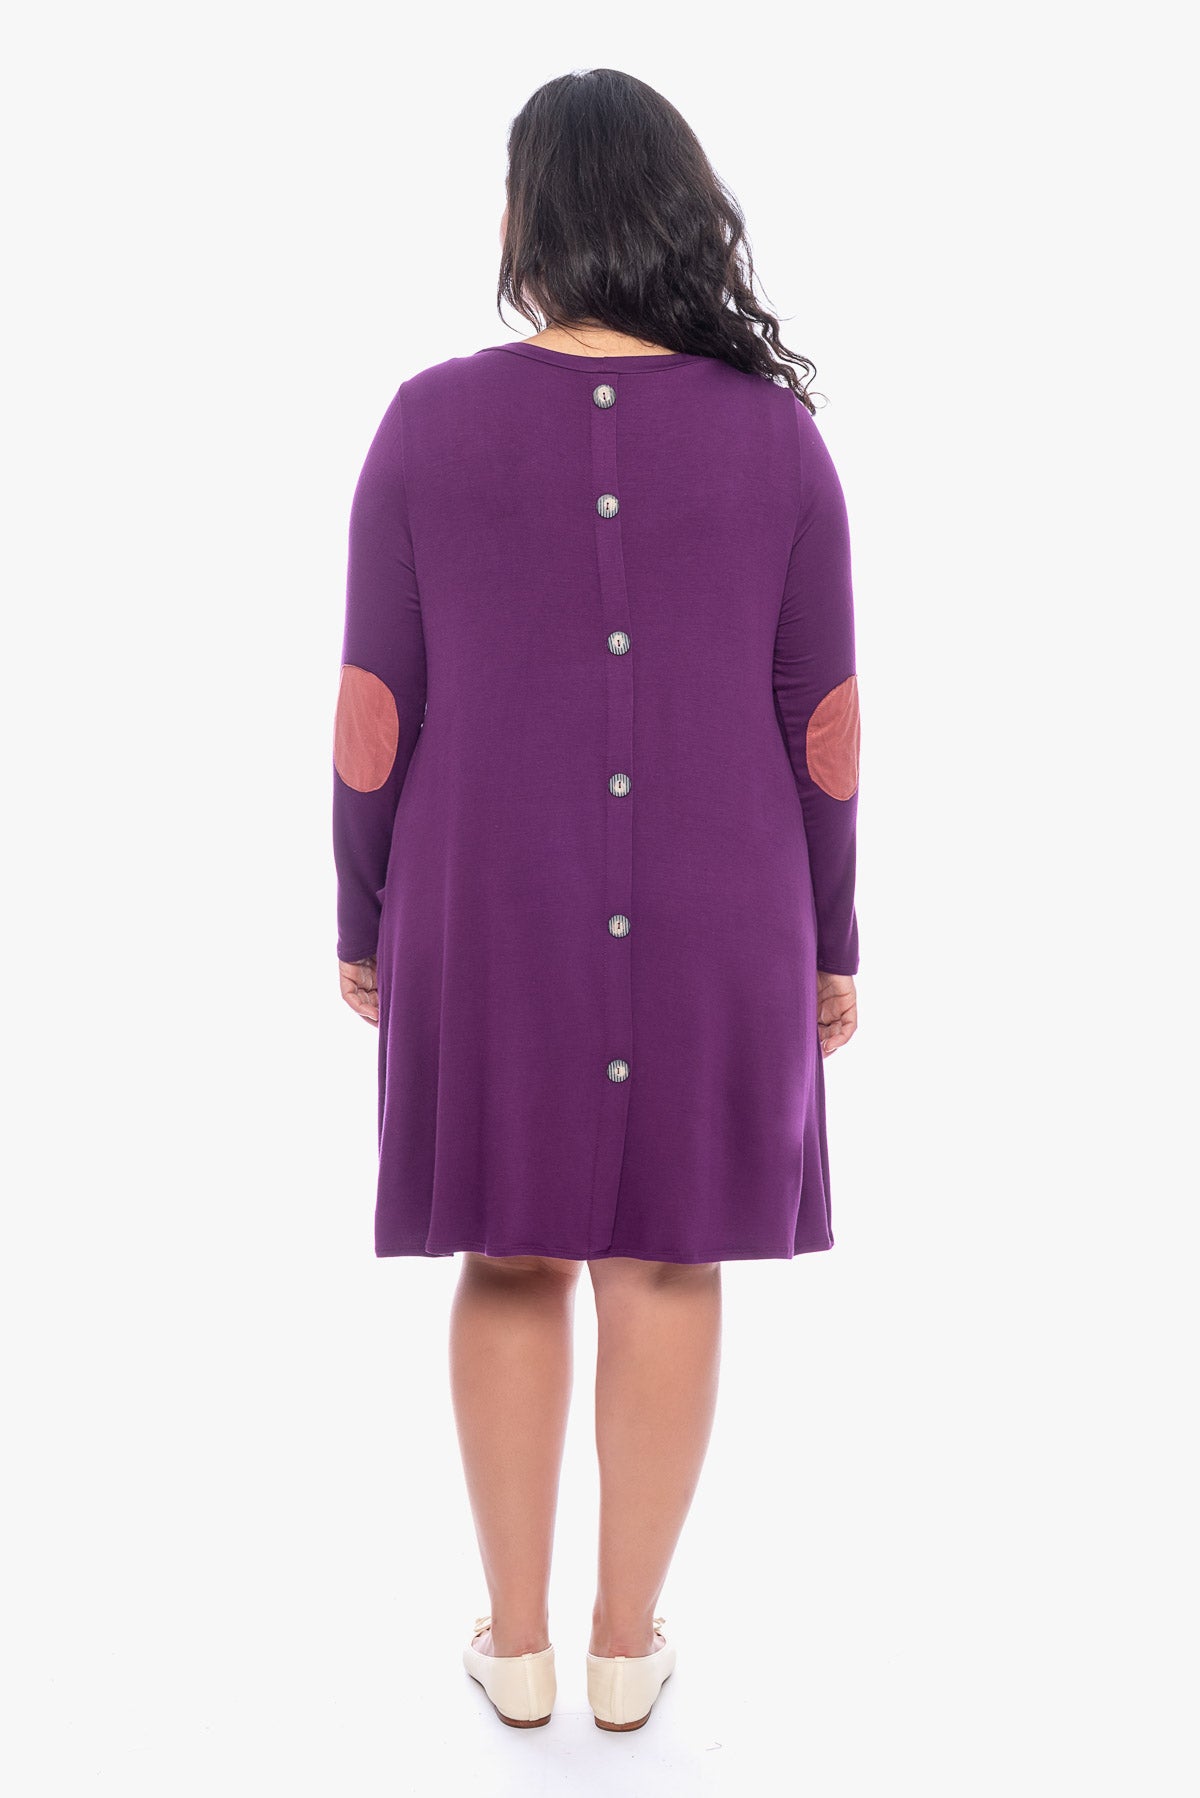 KARLY suede elbow dress/tunic